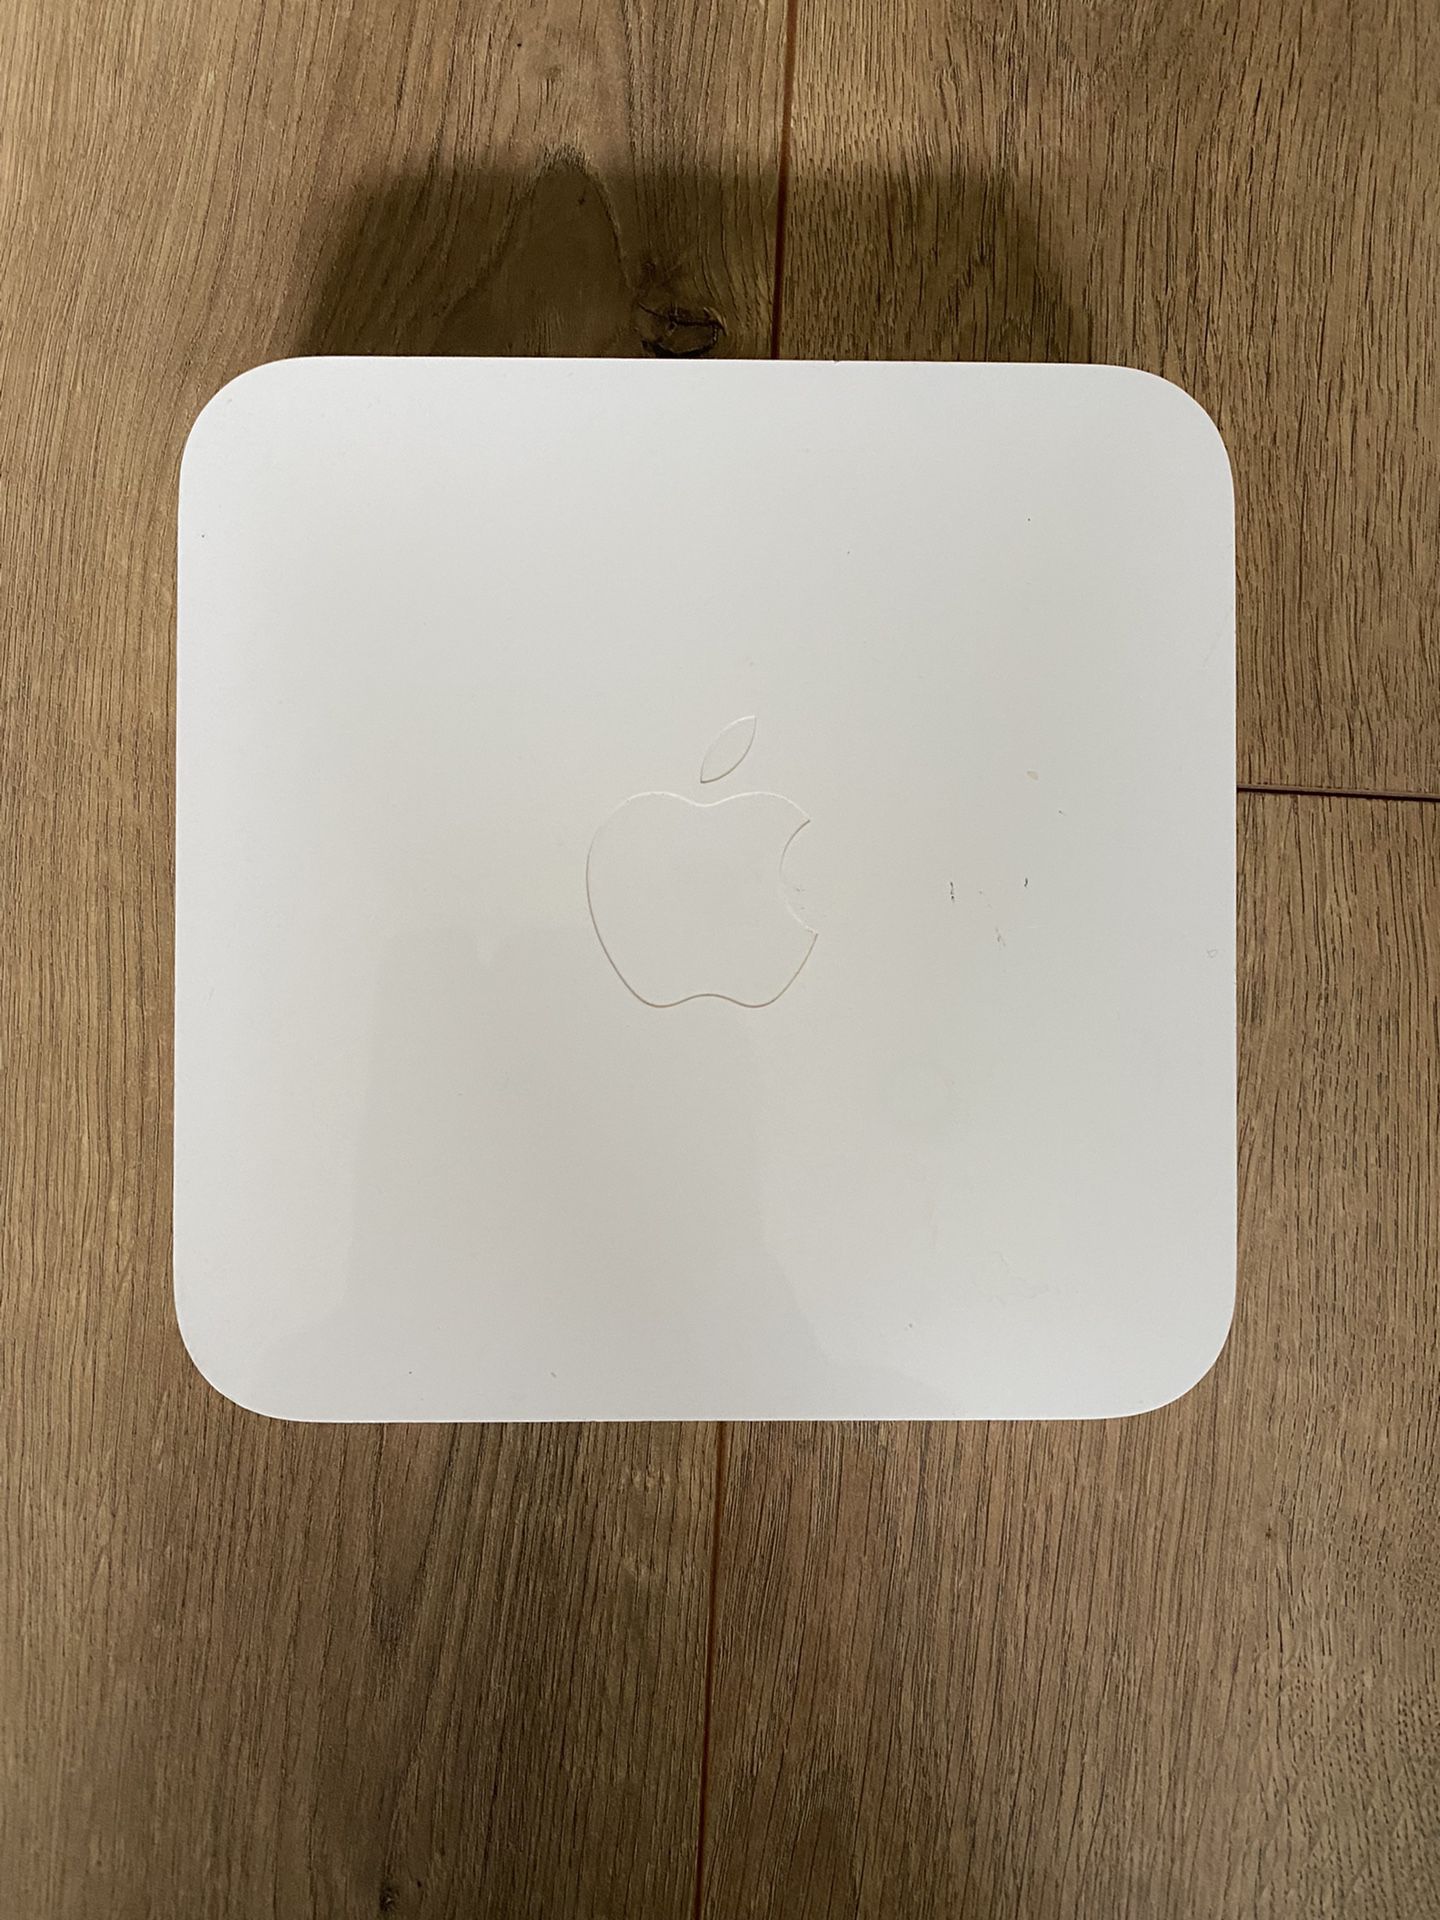  Apple AirPort Extreme Base Station (5th Generation)